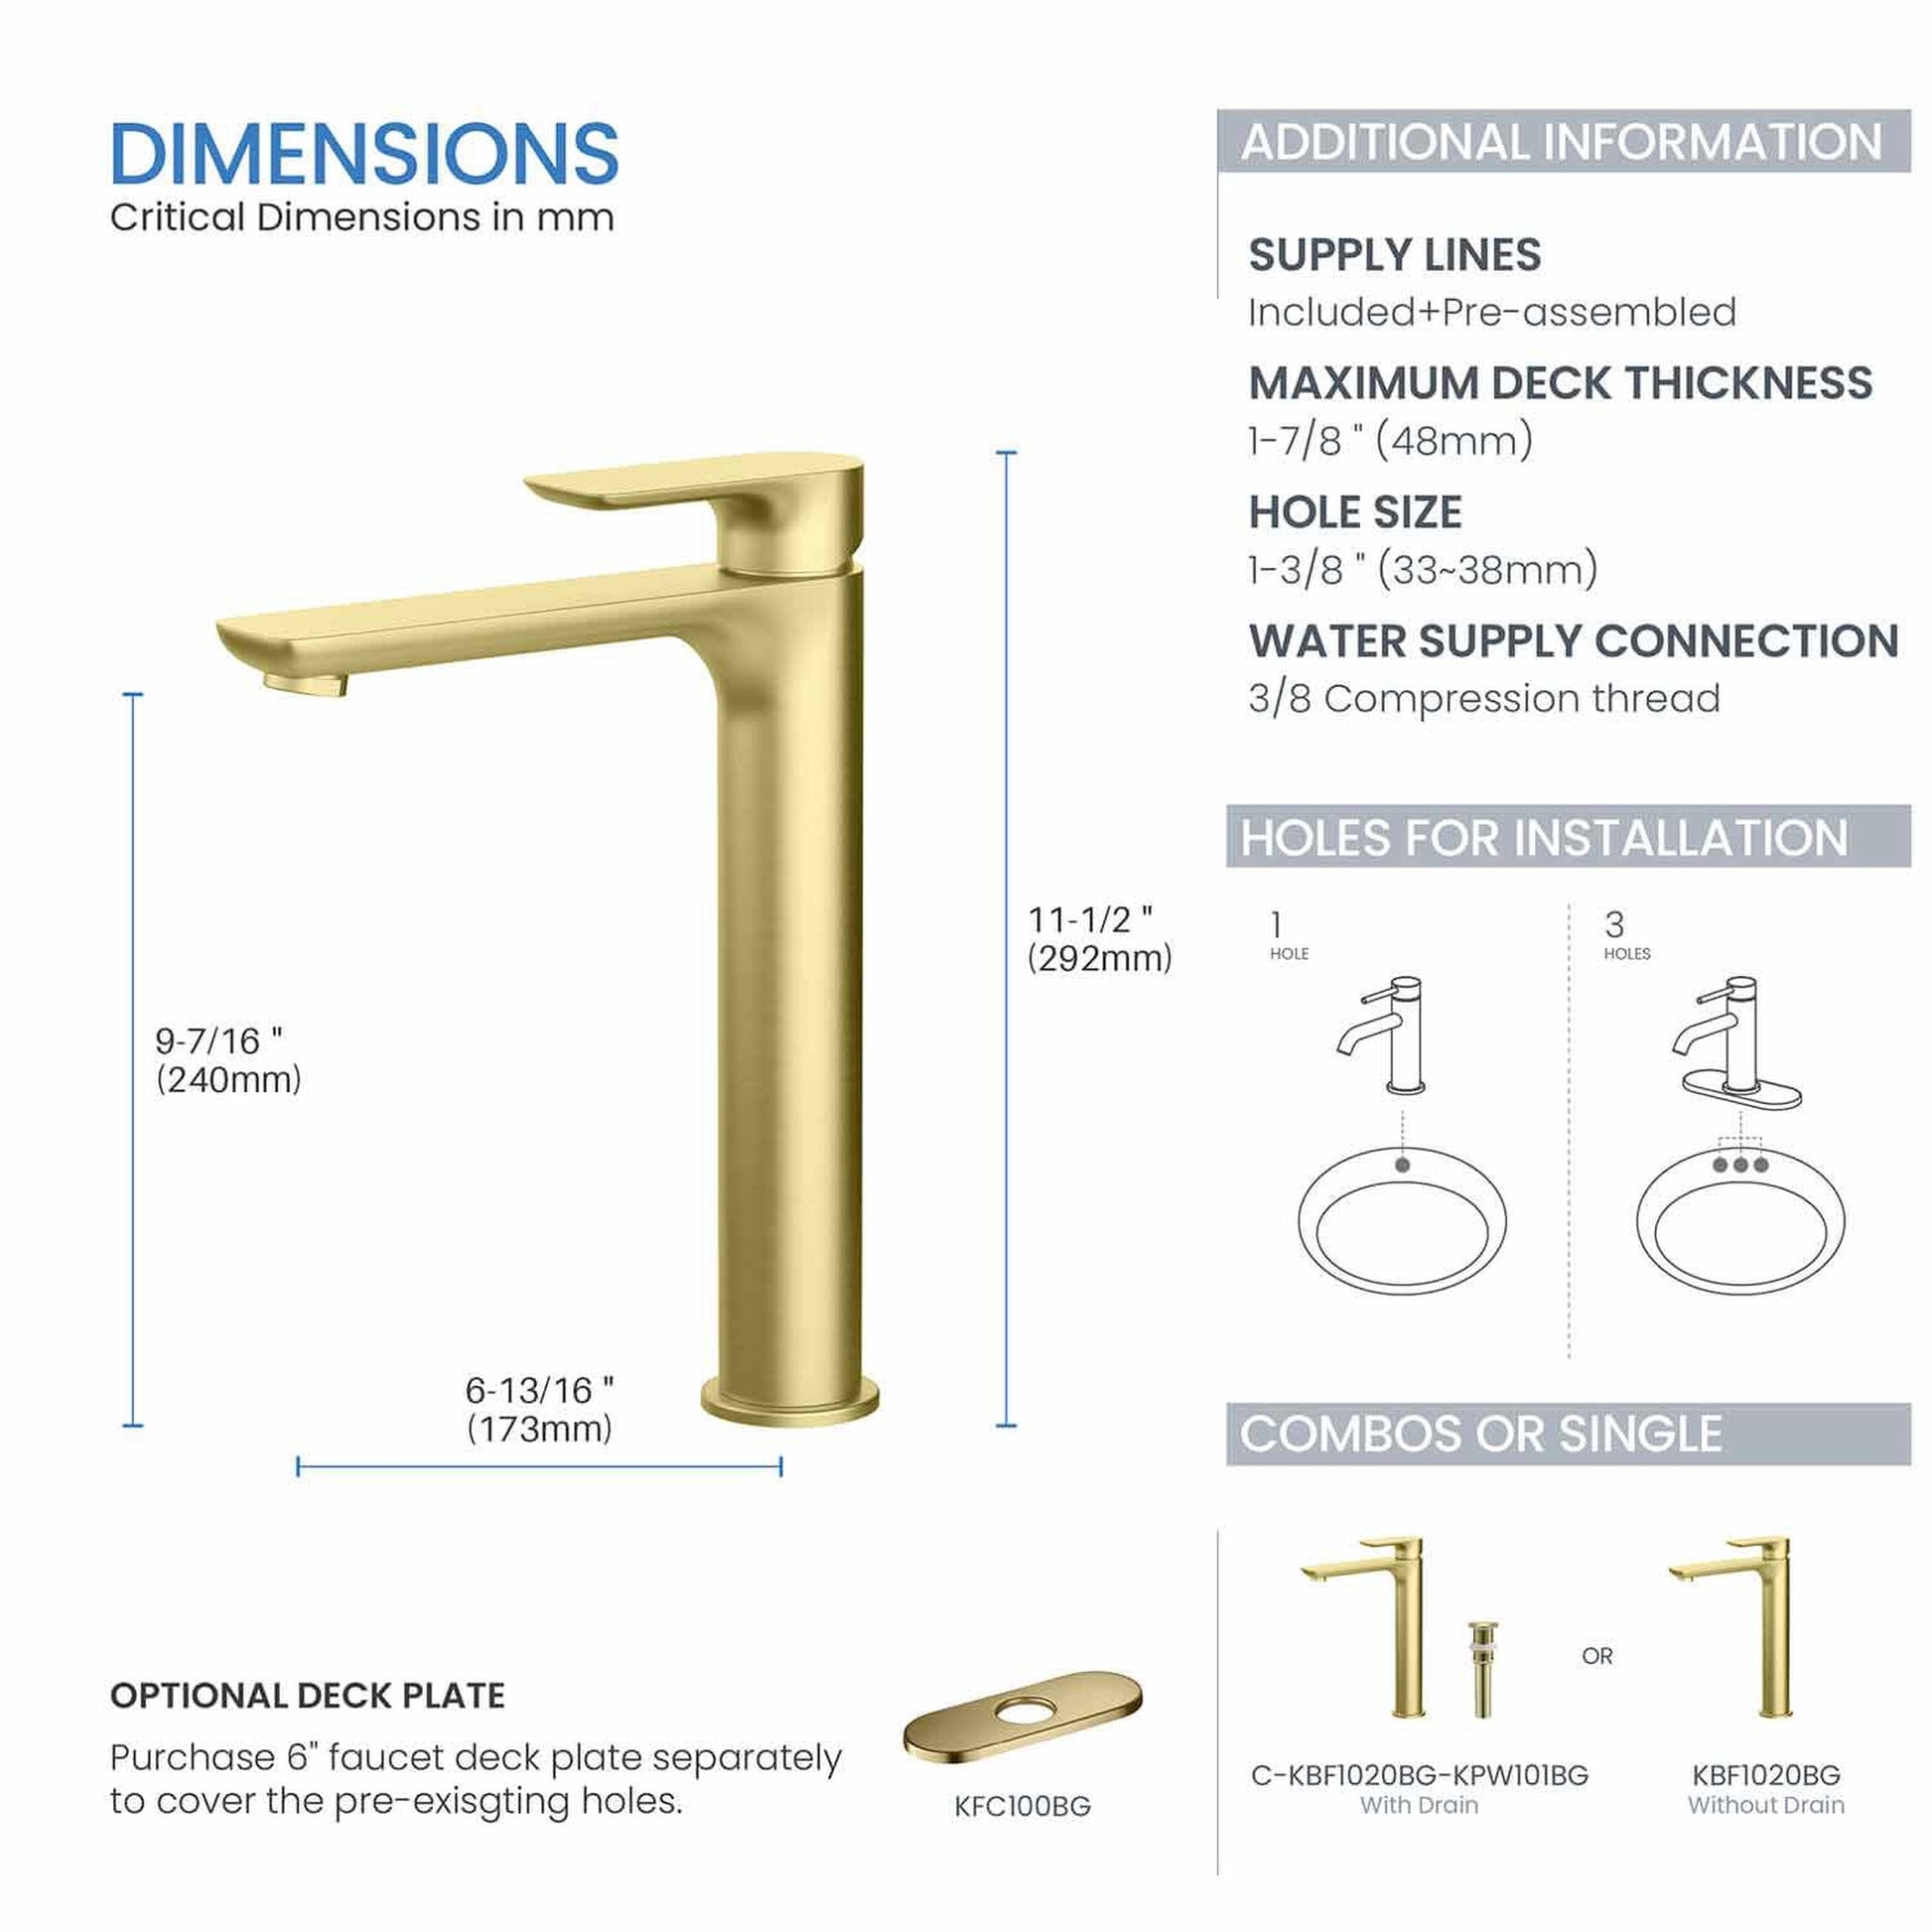 KIBI Tender-T Single Handle Brushed Gold Solid Brass Bathroom Vessel Sink Faucet With Pop-Up Drain Stopper Small Cover Without Overflow